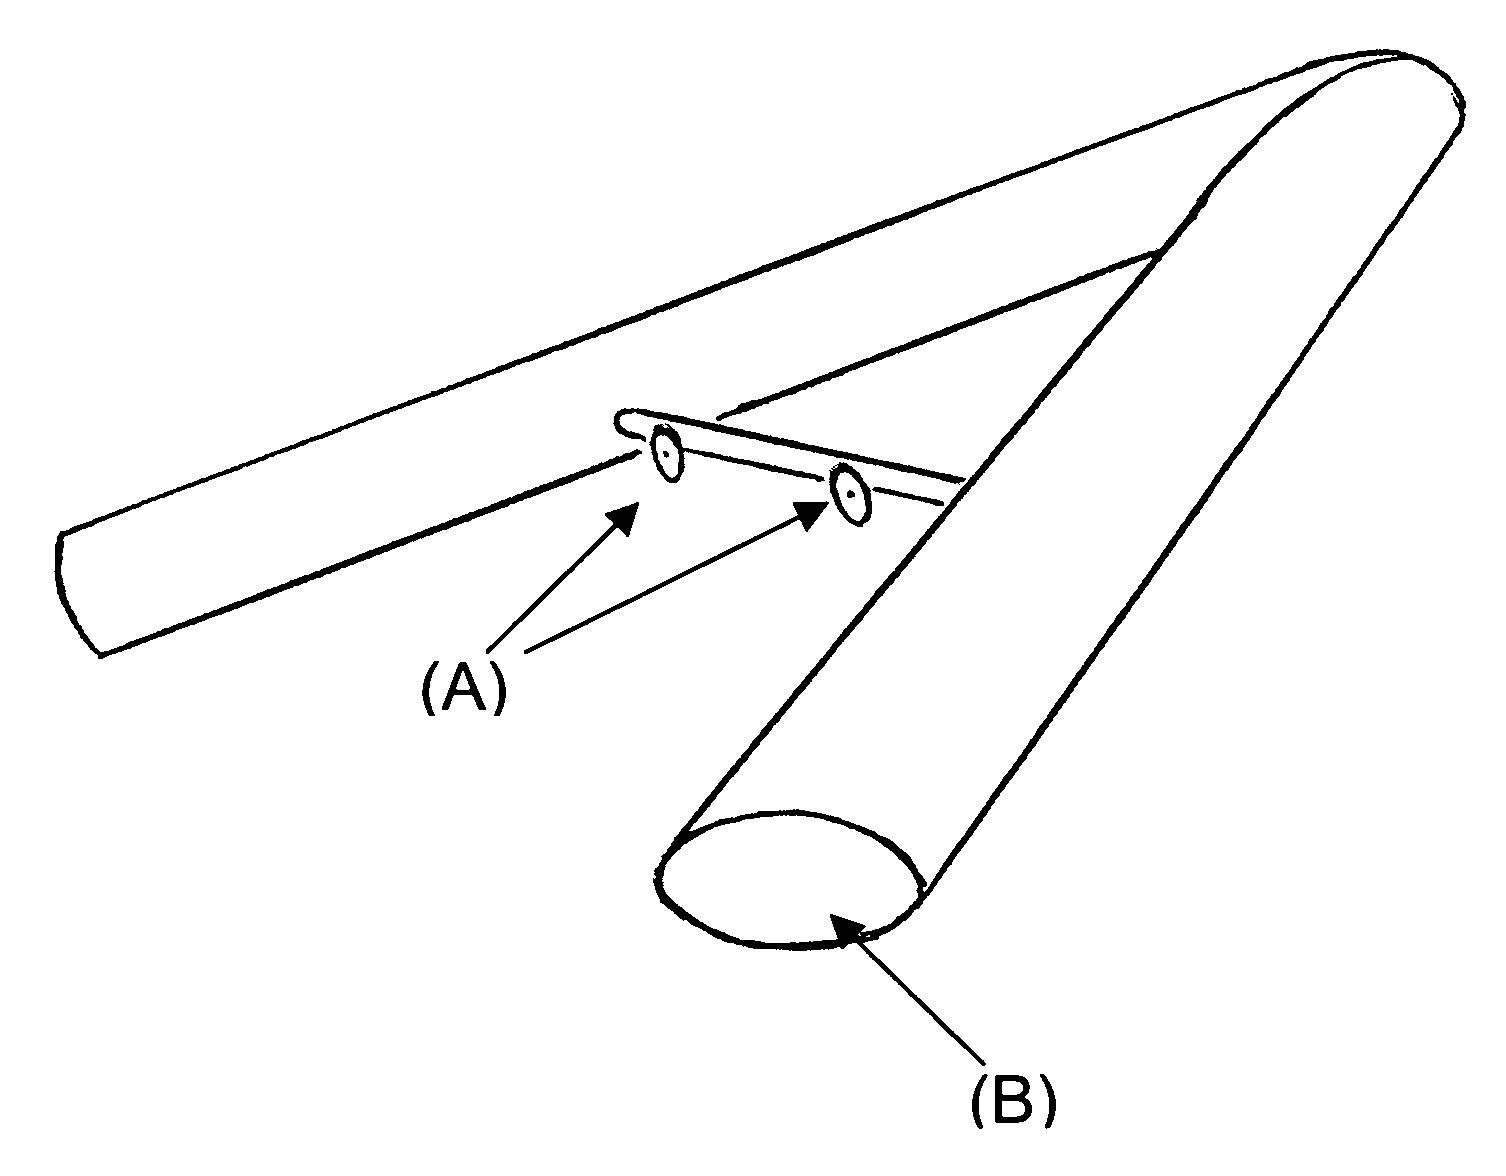 Method of traveling to earth's orbit using lighter than air vehicles